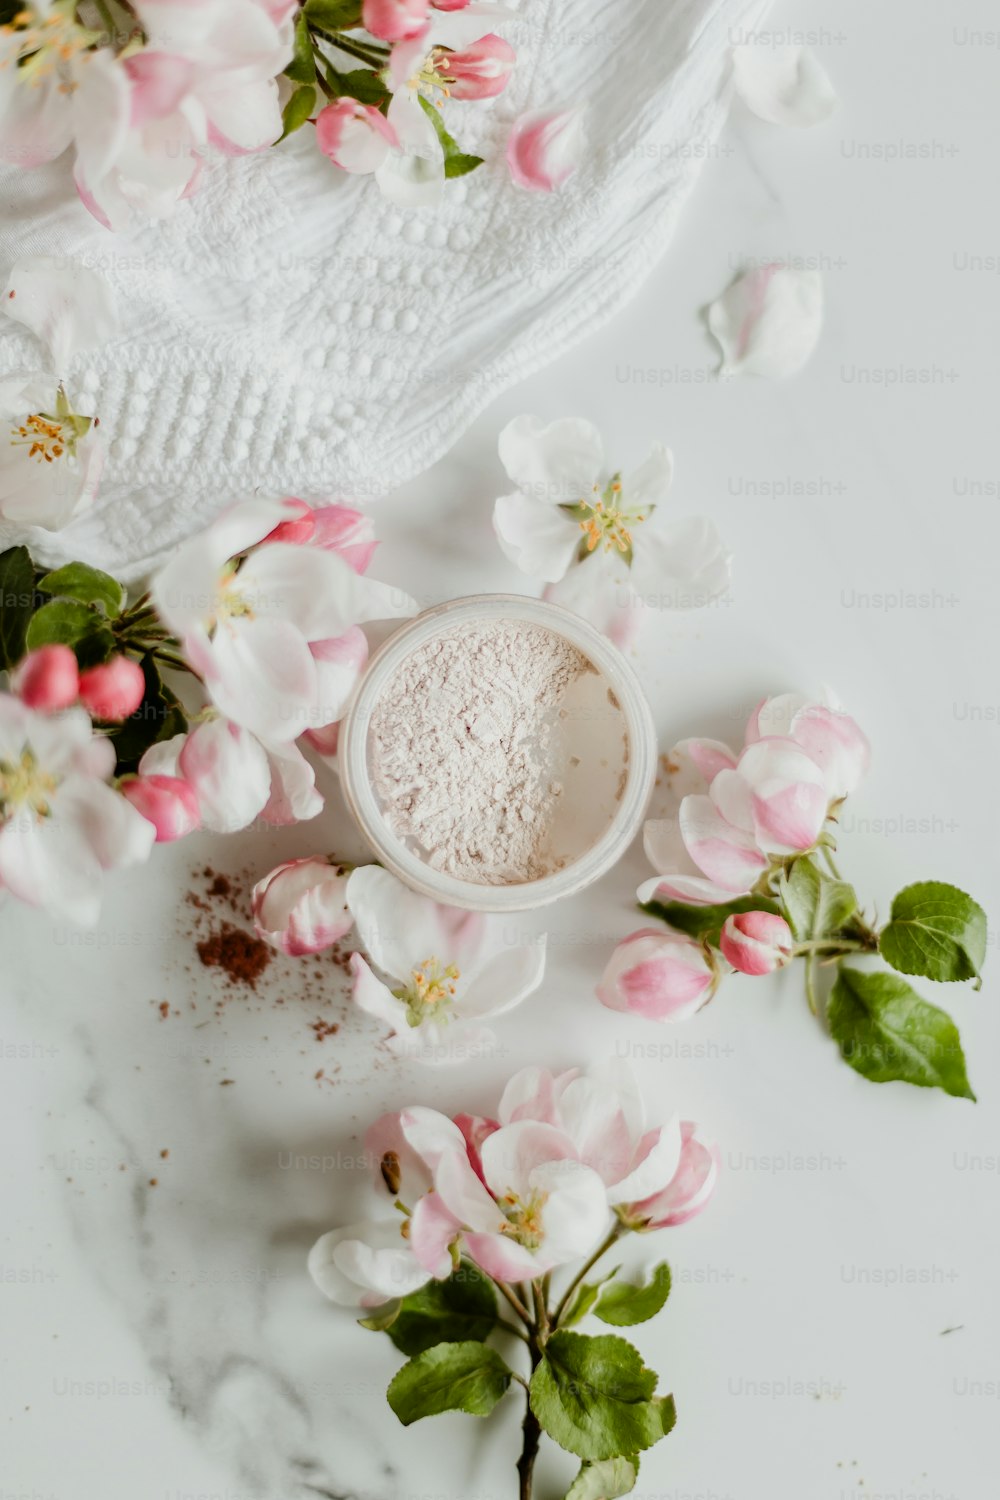 a white powder in a bowl surrounded by pink flowers